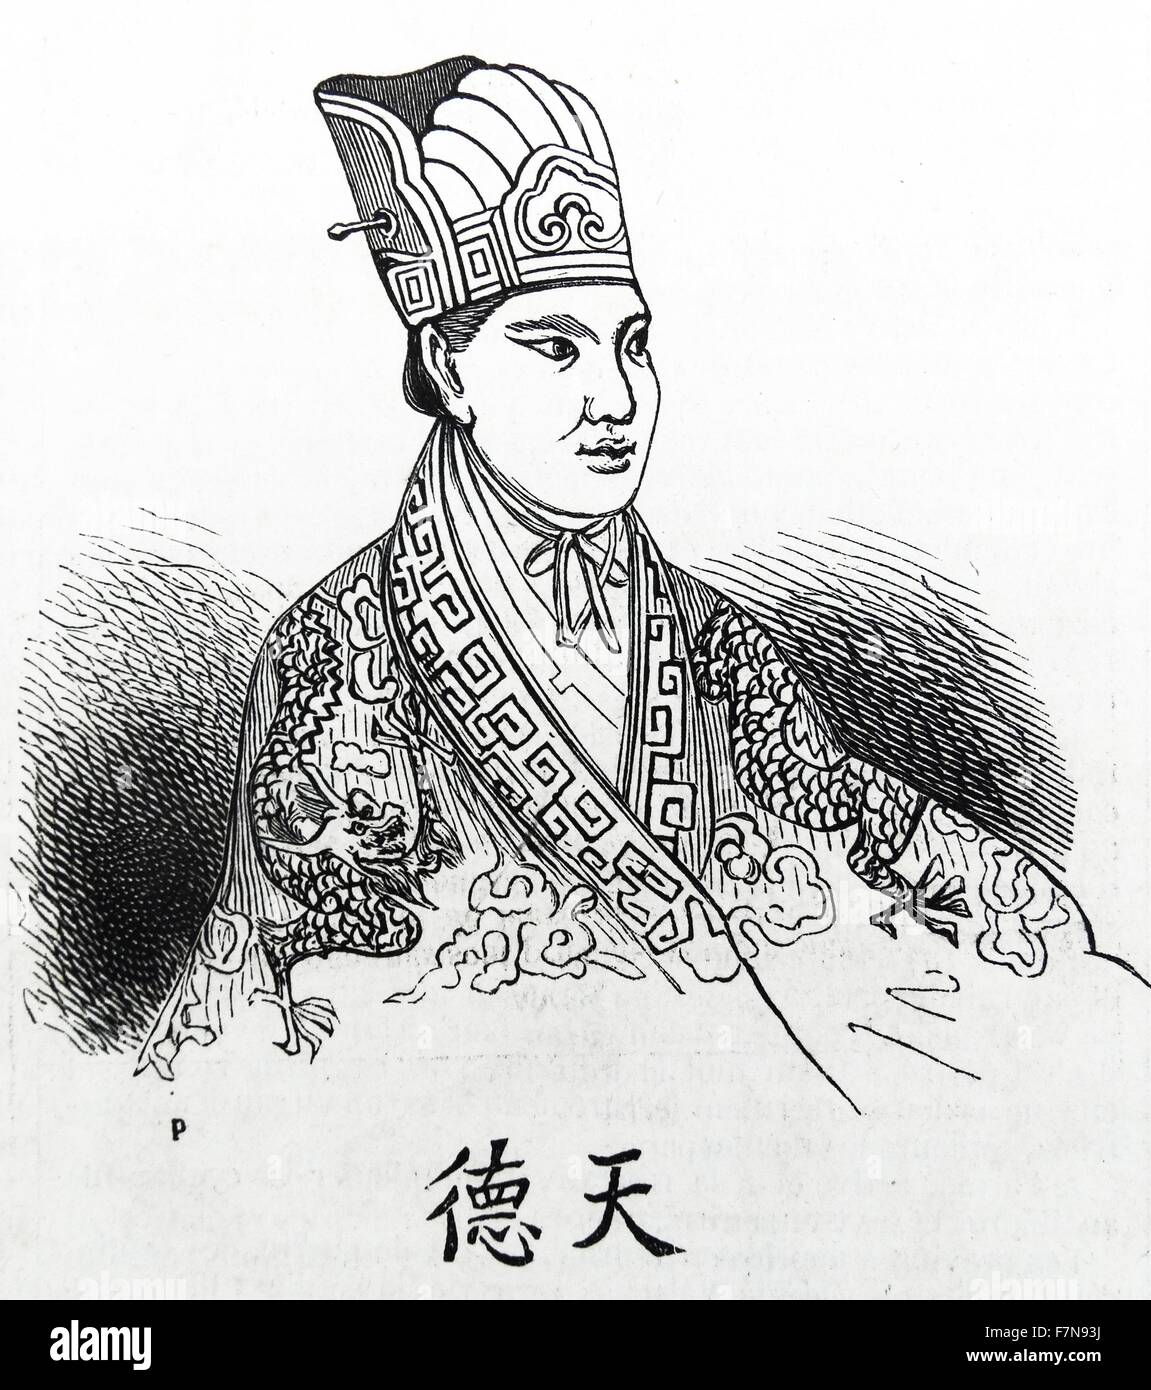 Illustration of a leader of a Chinese insurrection. Dated 1857 Stock Photo